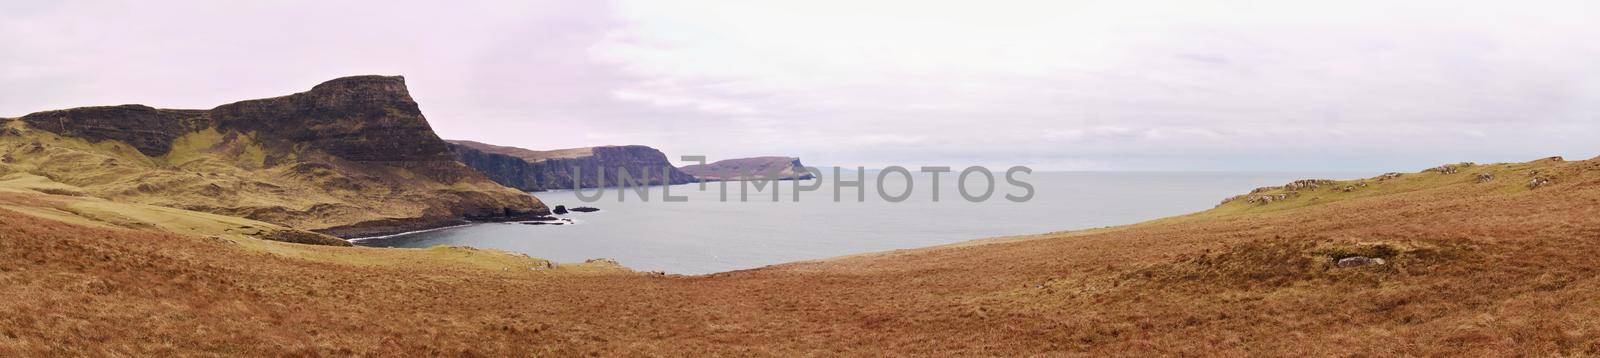 Waterstein hill.  Gorgeous rolling hills and towering cliffs above bay by rdonar2